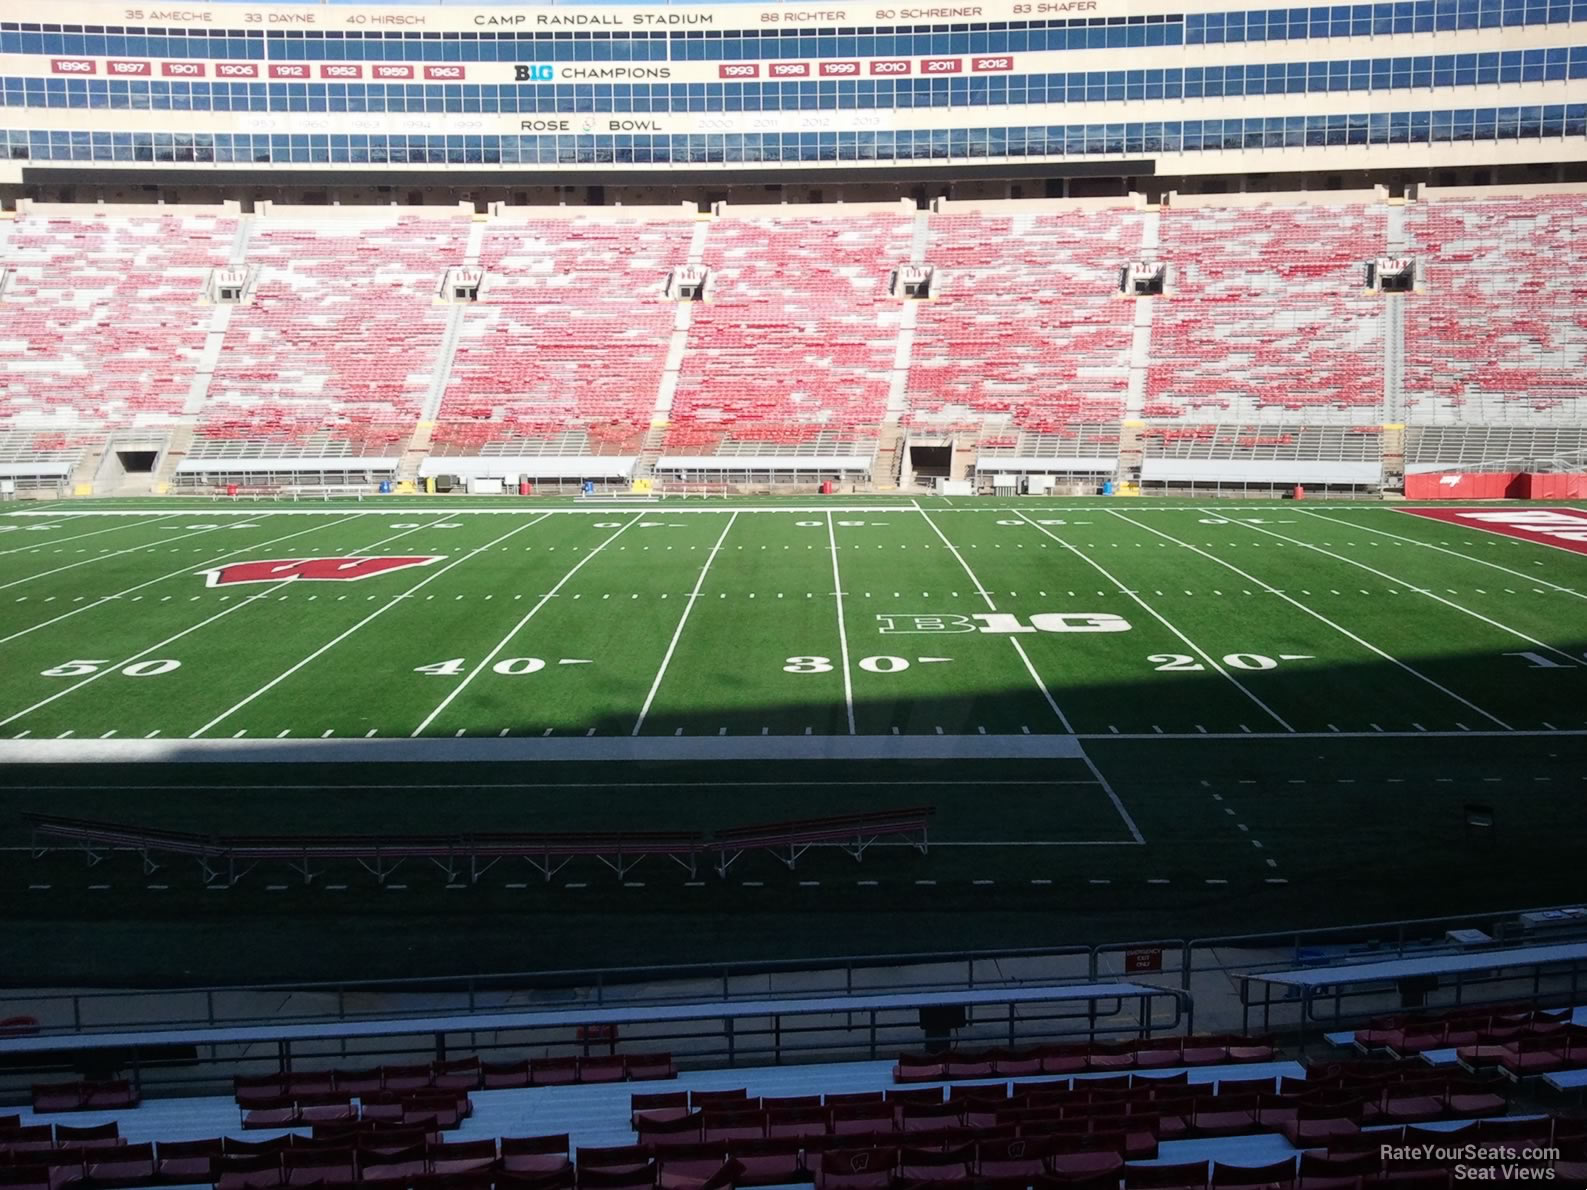 section d, row 30 seat view  - camp randall stadium